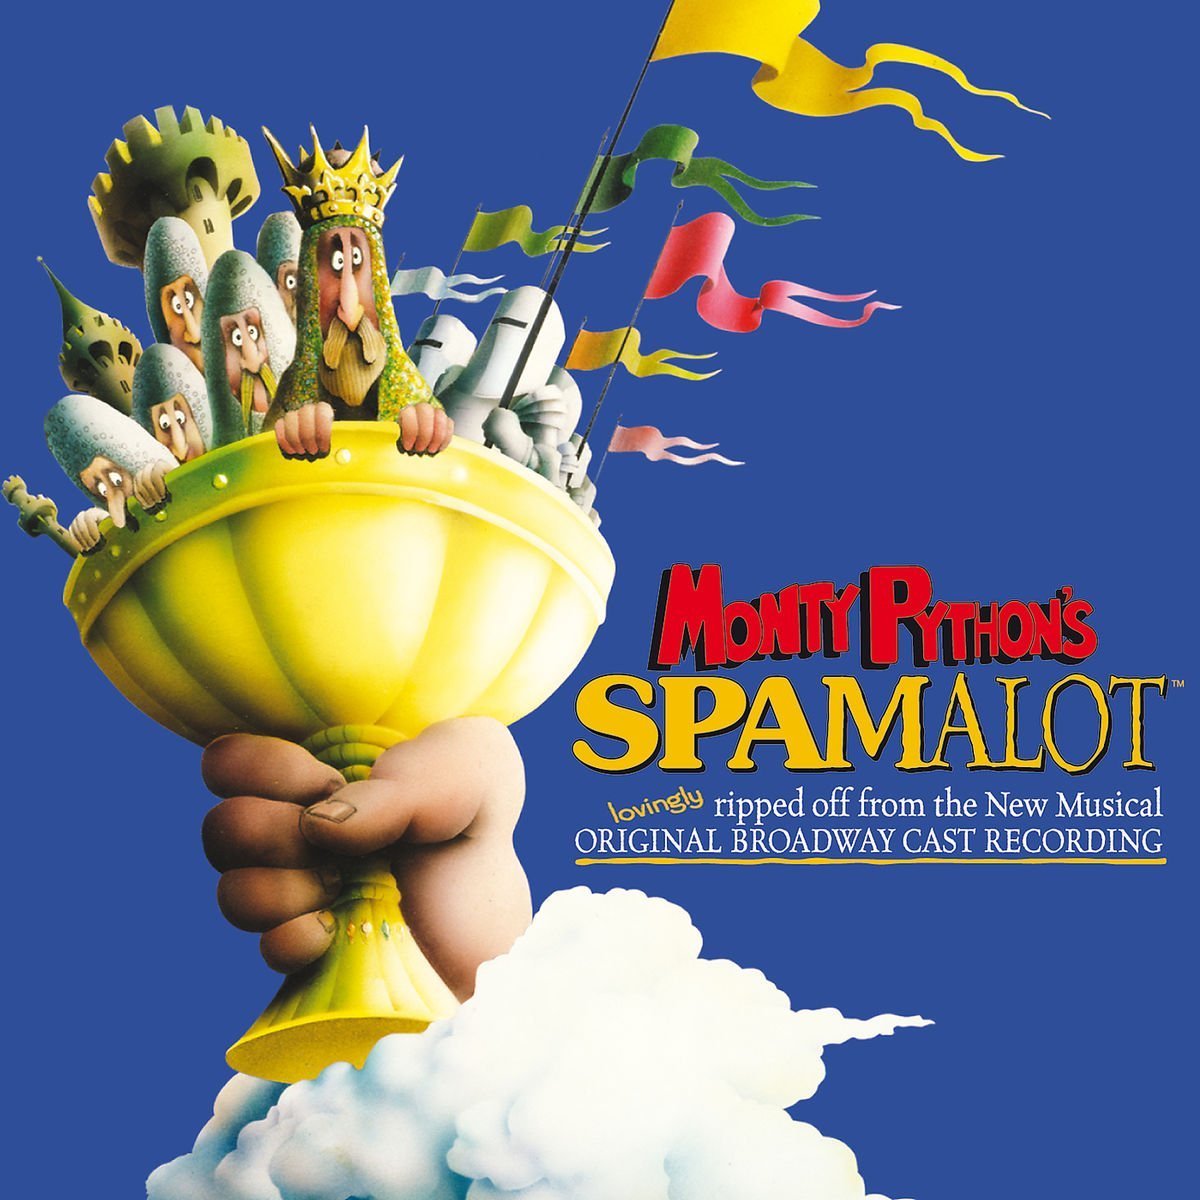 MONTY PYTHON'S SPAMALOT Comes To Pier One Theatre from 6/29 